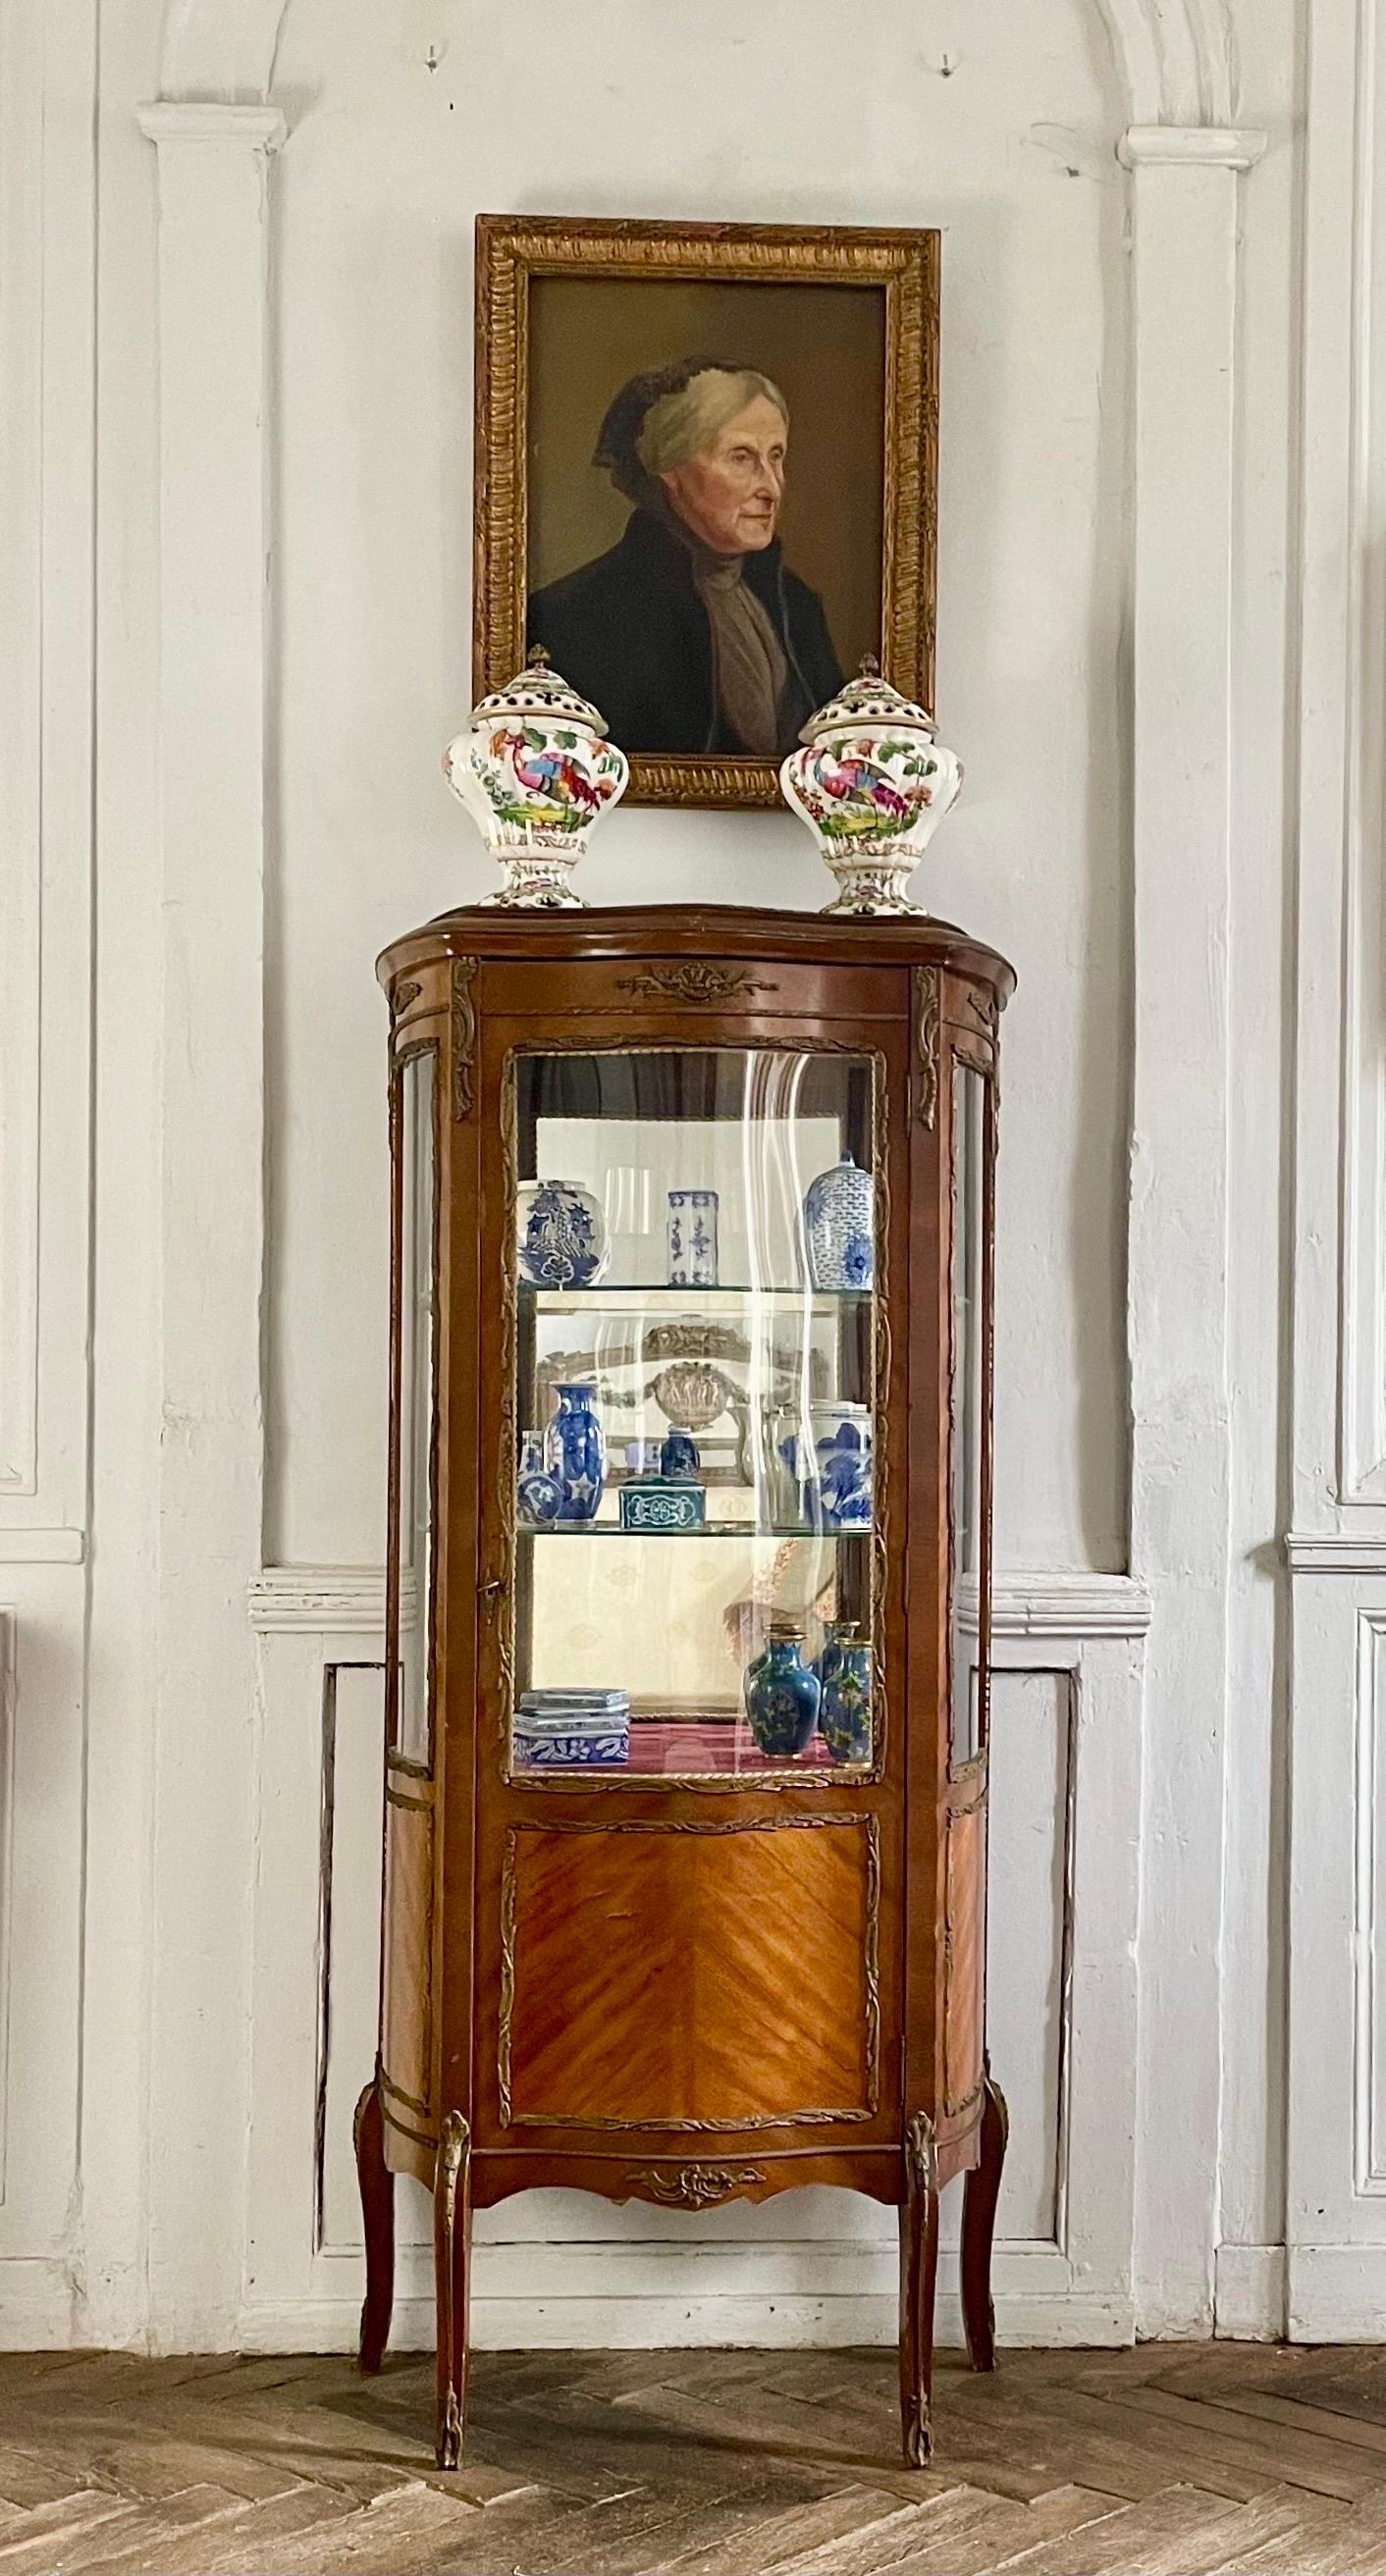 Magnificent mirrored display case in inlaid mahogany veneer in the Louis XV style - Napoleon III period - 19th century.
Charming showcase with ideal dimensions for an office, bedroom, living room, entrance or gallery.
Elegant French furniture.